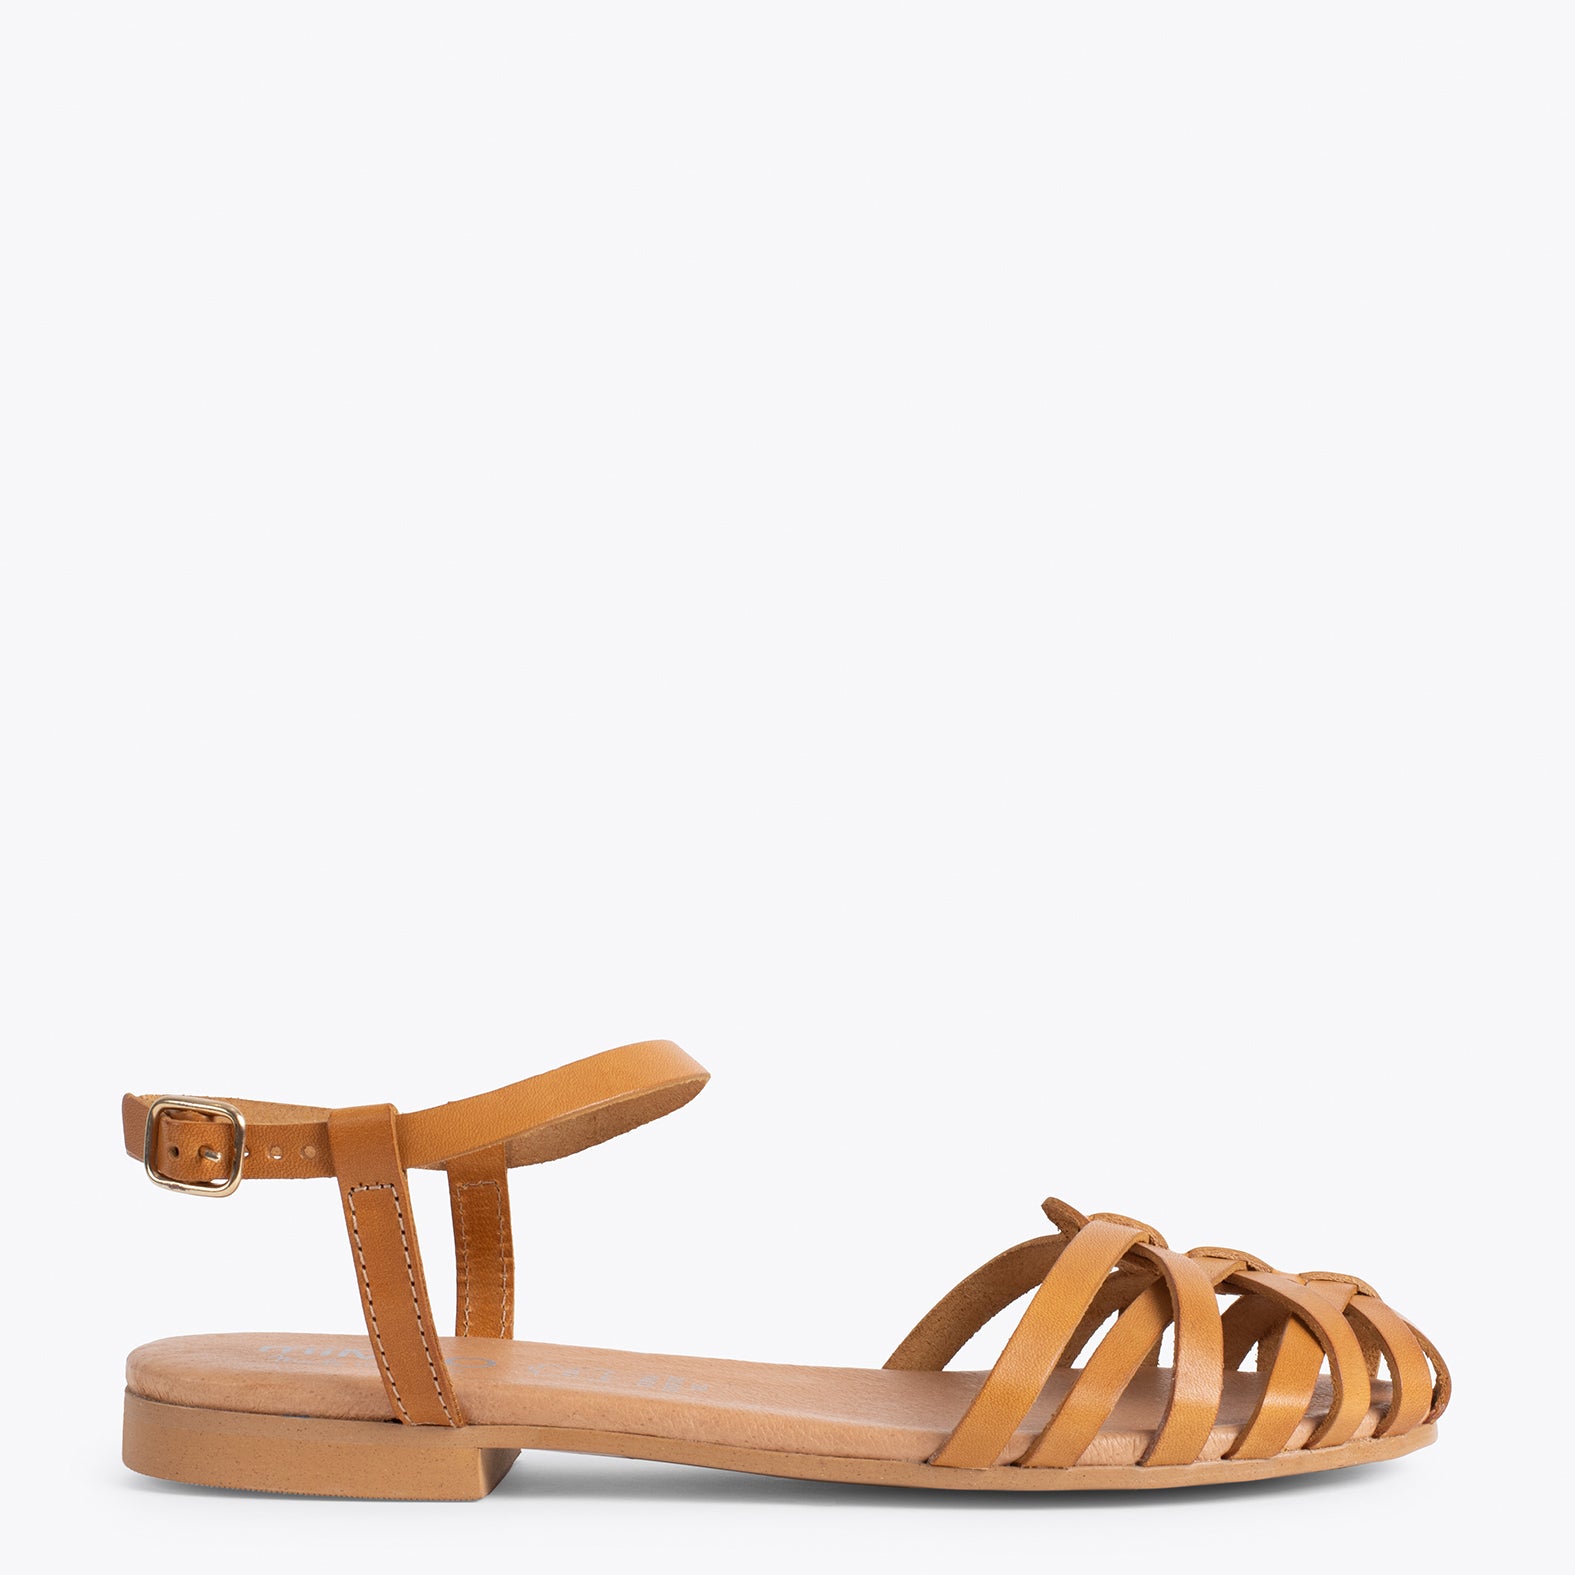 BEACH - YELLOW sandal with straps